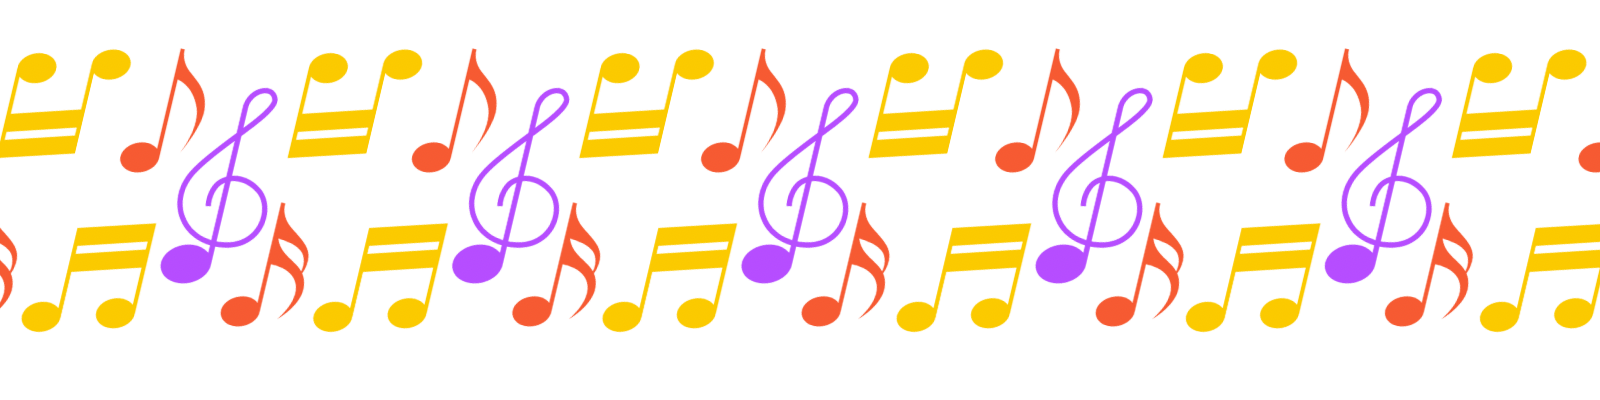 music notes